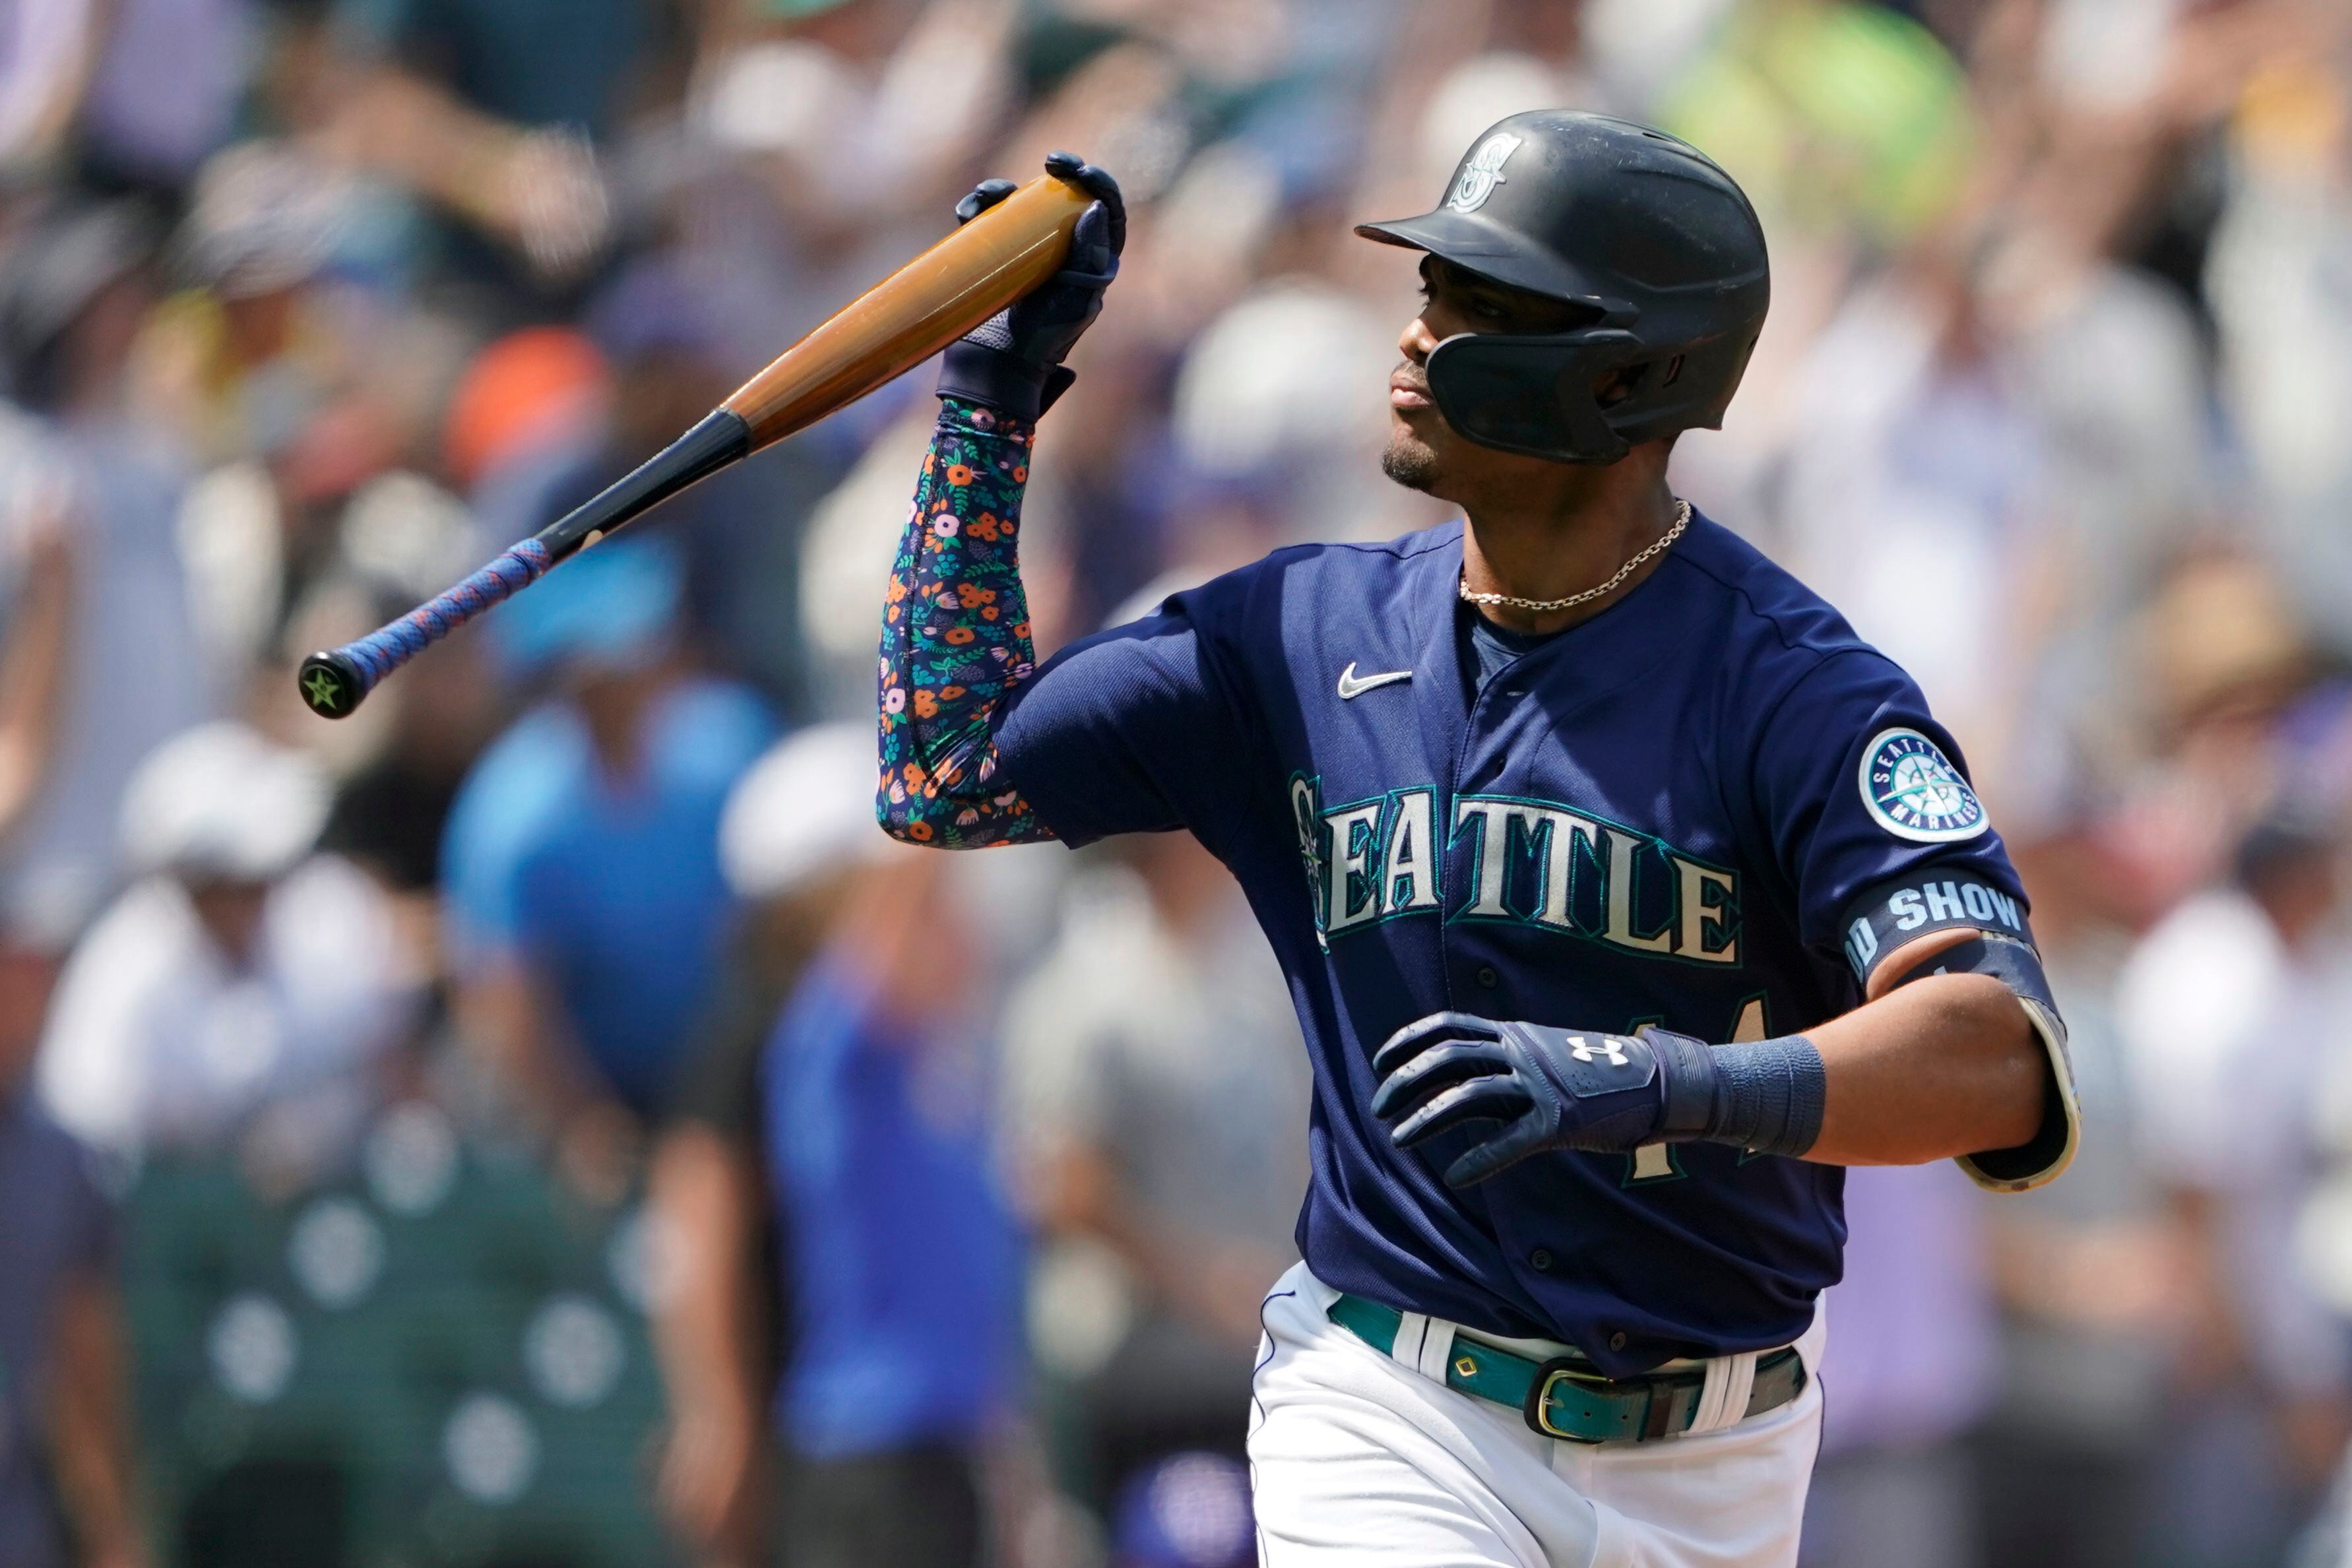 Rodriguez has 5 hits, 5 RBIs and go-ahead 3-run shot in the eighth as  Mariners beat Royals 6-4 - ABC News